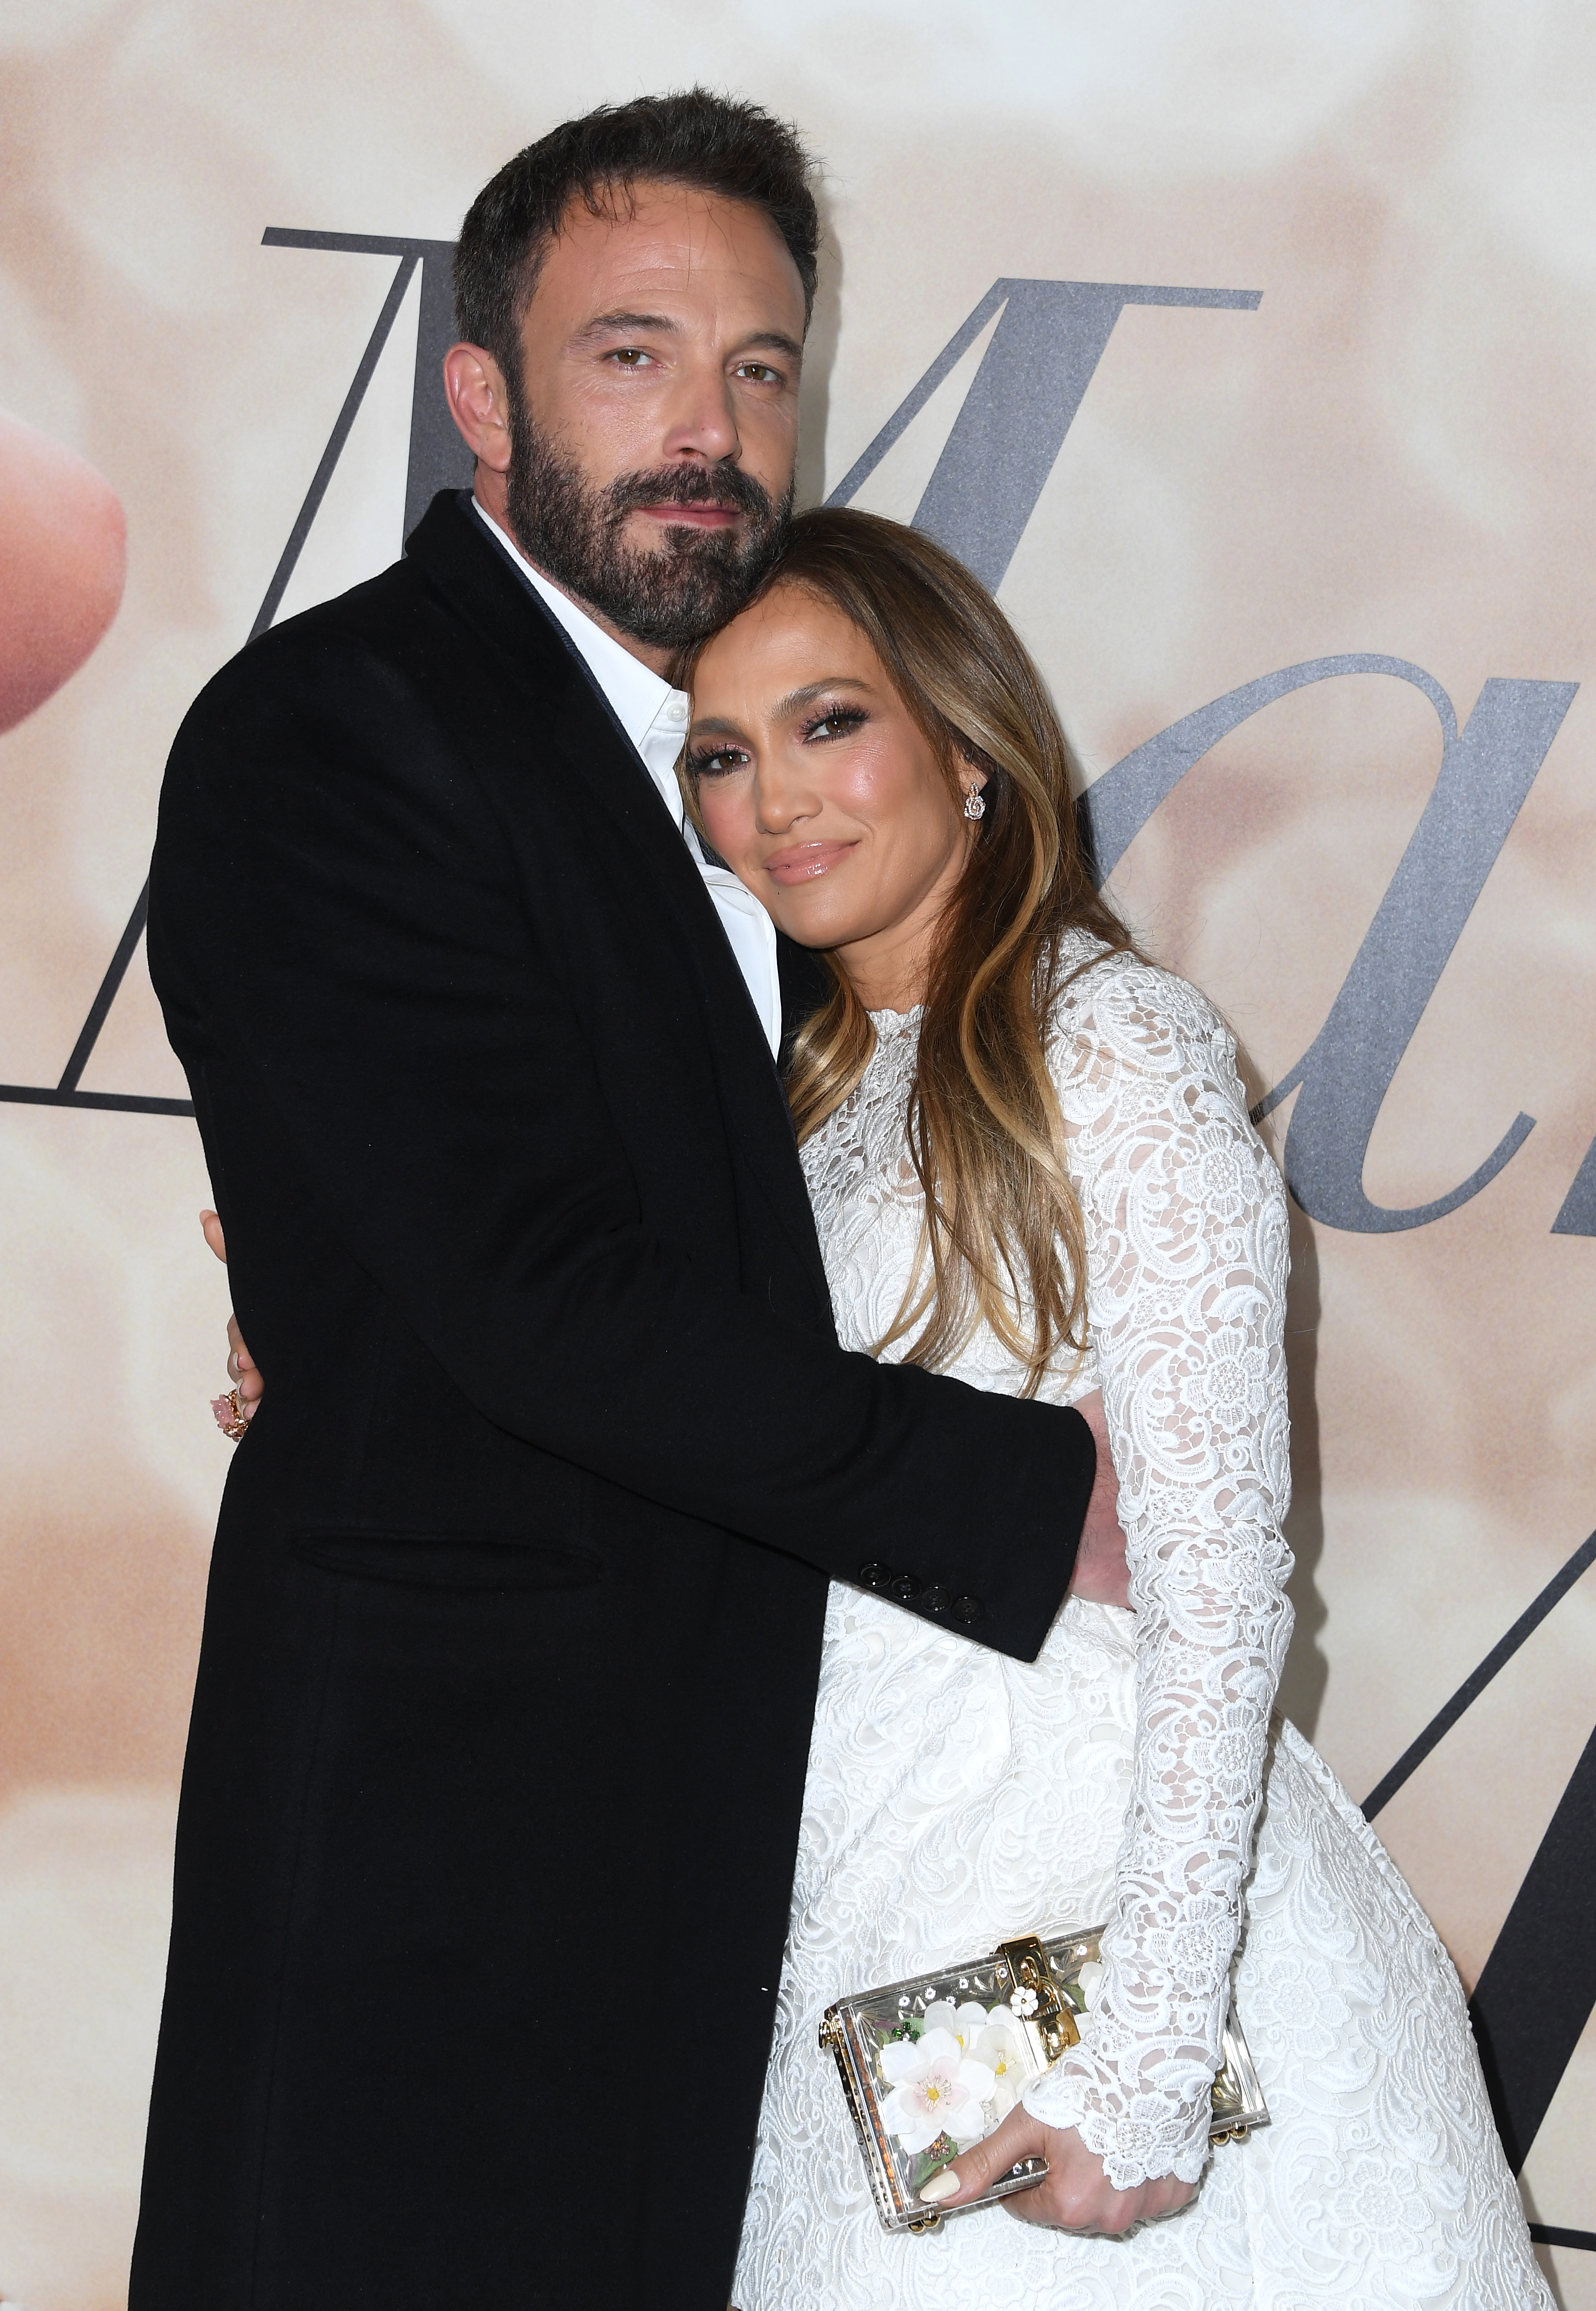 Ben Affleck and Jennifer Lopez at the special screening Of "Marry Me" in Los Angeles, California on February 08, 2022 | Source: Getty Images